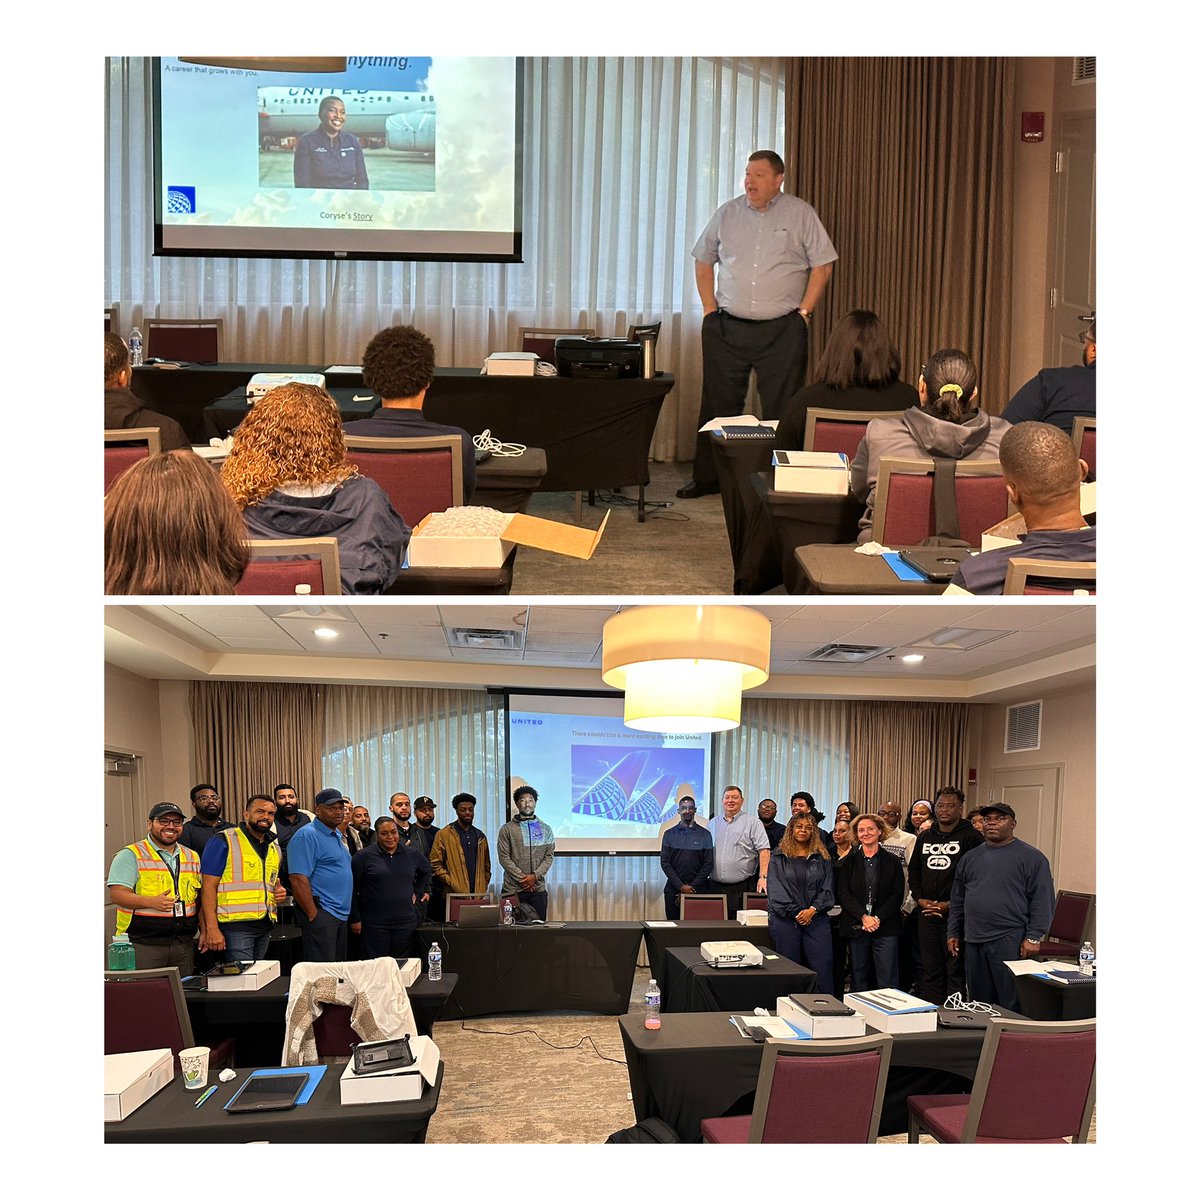 Our very own Mr Motivator @RDURodney gearing up some of our new UA ramp agents here in Raleigh, it's true you can be what you want to be at United!! thanks also to James, Luis, Max and John for their unwavering support in all the transitions and startups. #beingunited @united